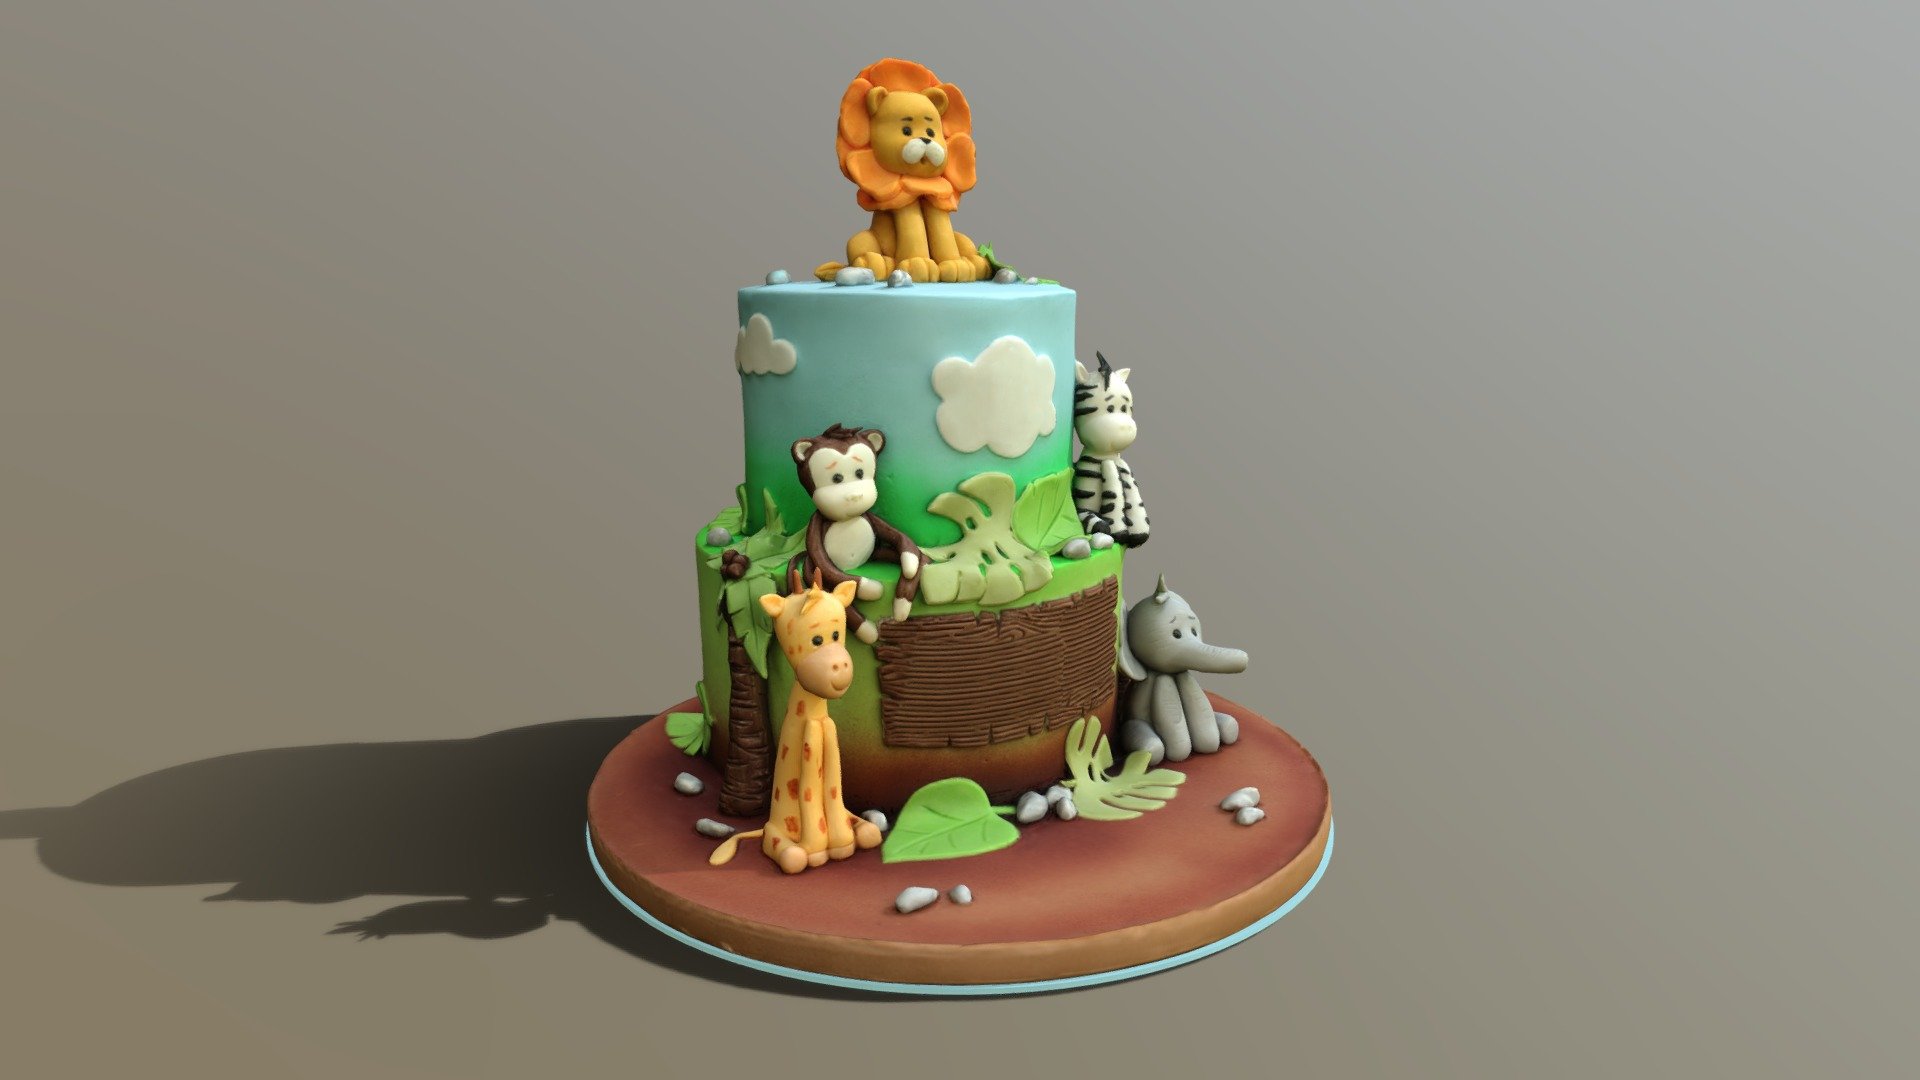 3D scan of a cool Safari Animals Cake which is made by CAKESBURG Online Premium Cake Shop in UK. You can also order real cake from this link: https://cakesburg.co.uk/collections/best-seller-2/products/safari-animals-cake-5

Textures 4096*4096px PBR photoscan-based materials Base Color, Normal, Roughness, Specular) - Cool Safari Animals Cake - Buy Royalty Free 3D model by Cakesburg Premium 3D Cake Shop (@Viscom_Cakesburg) 3d model